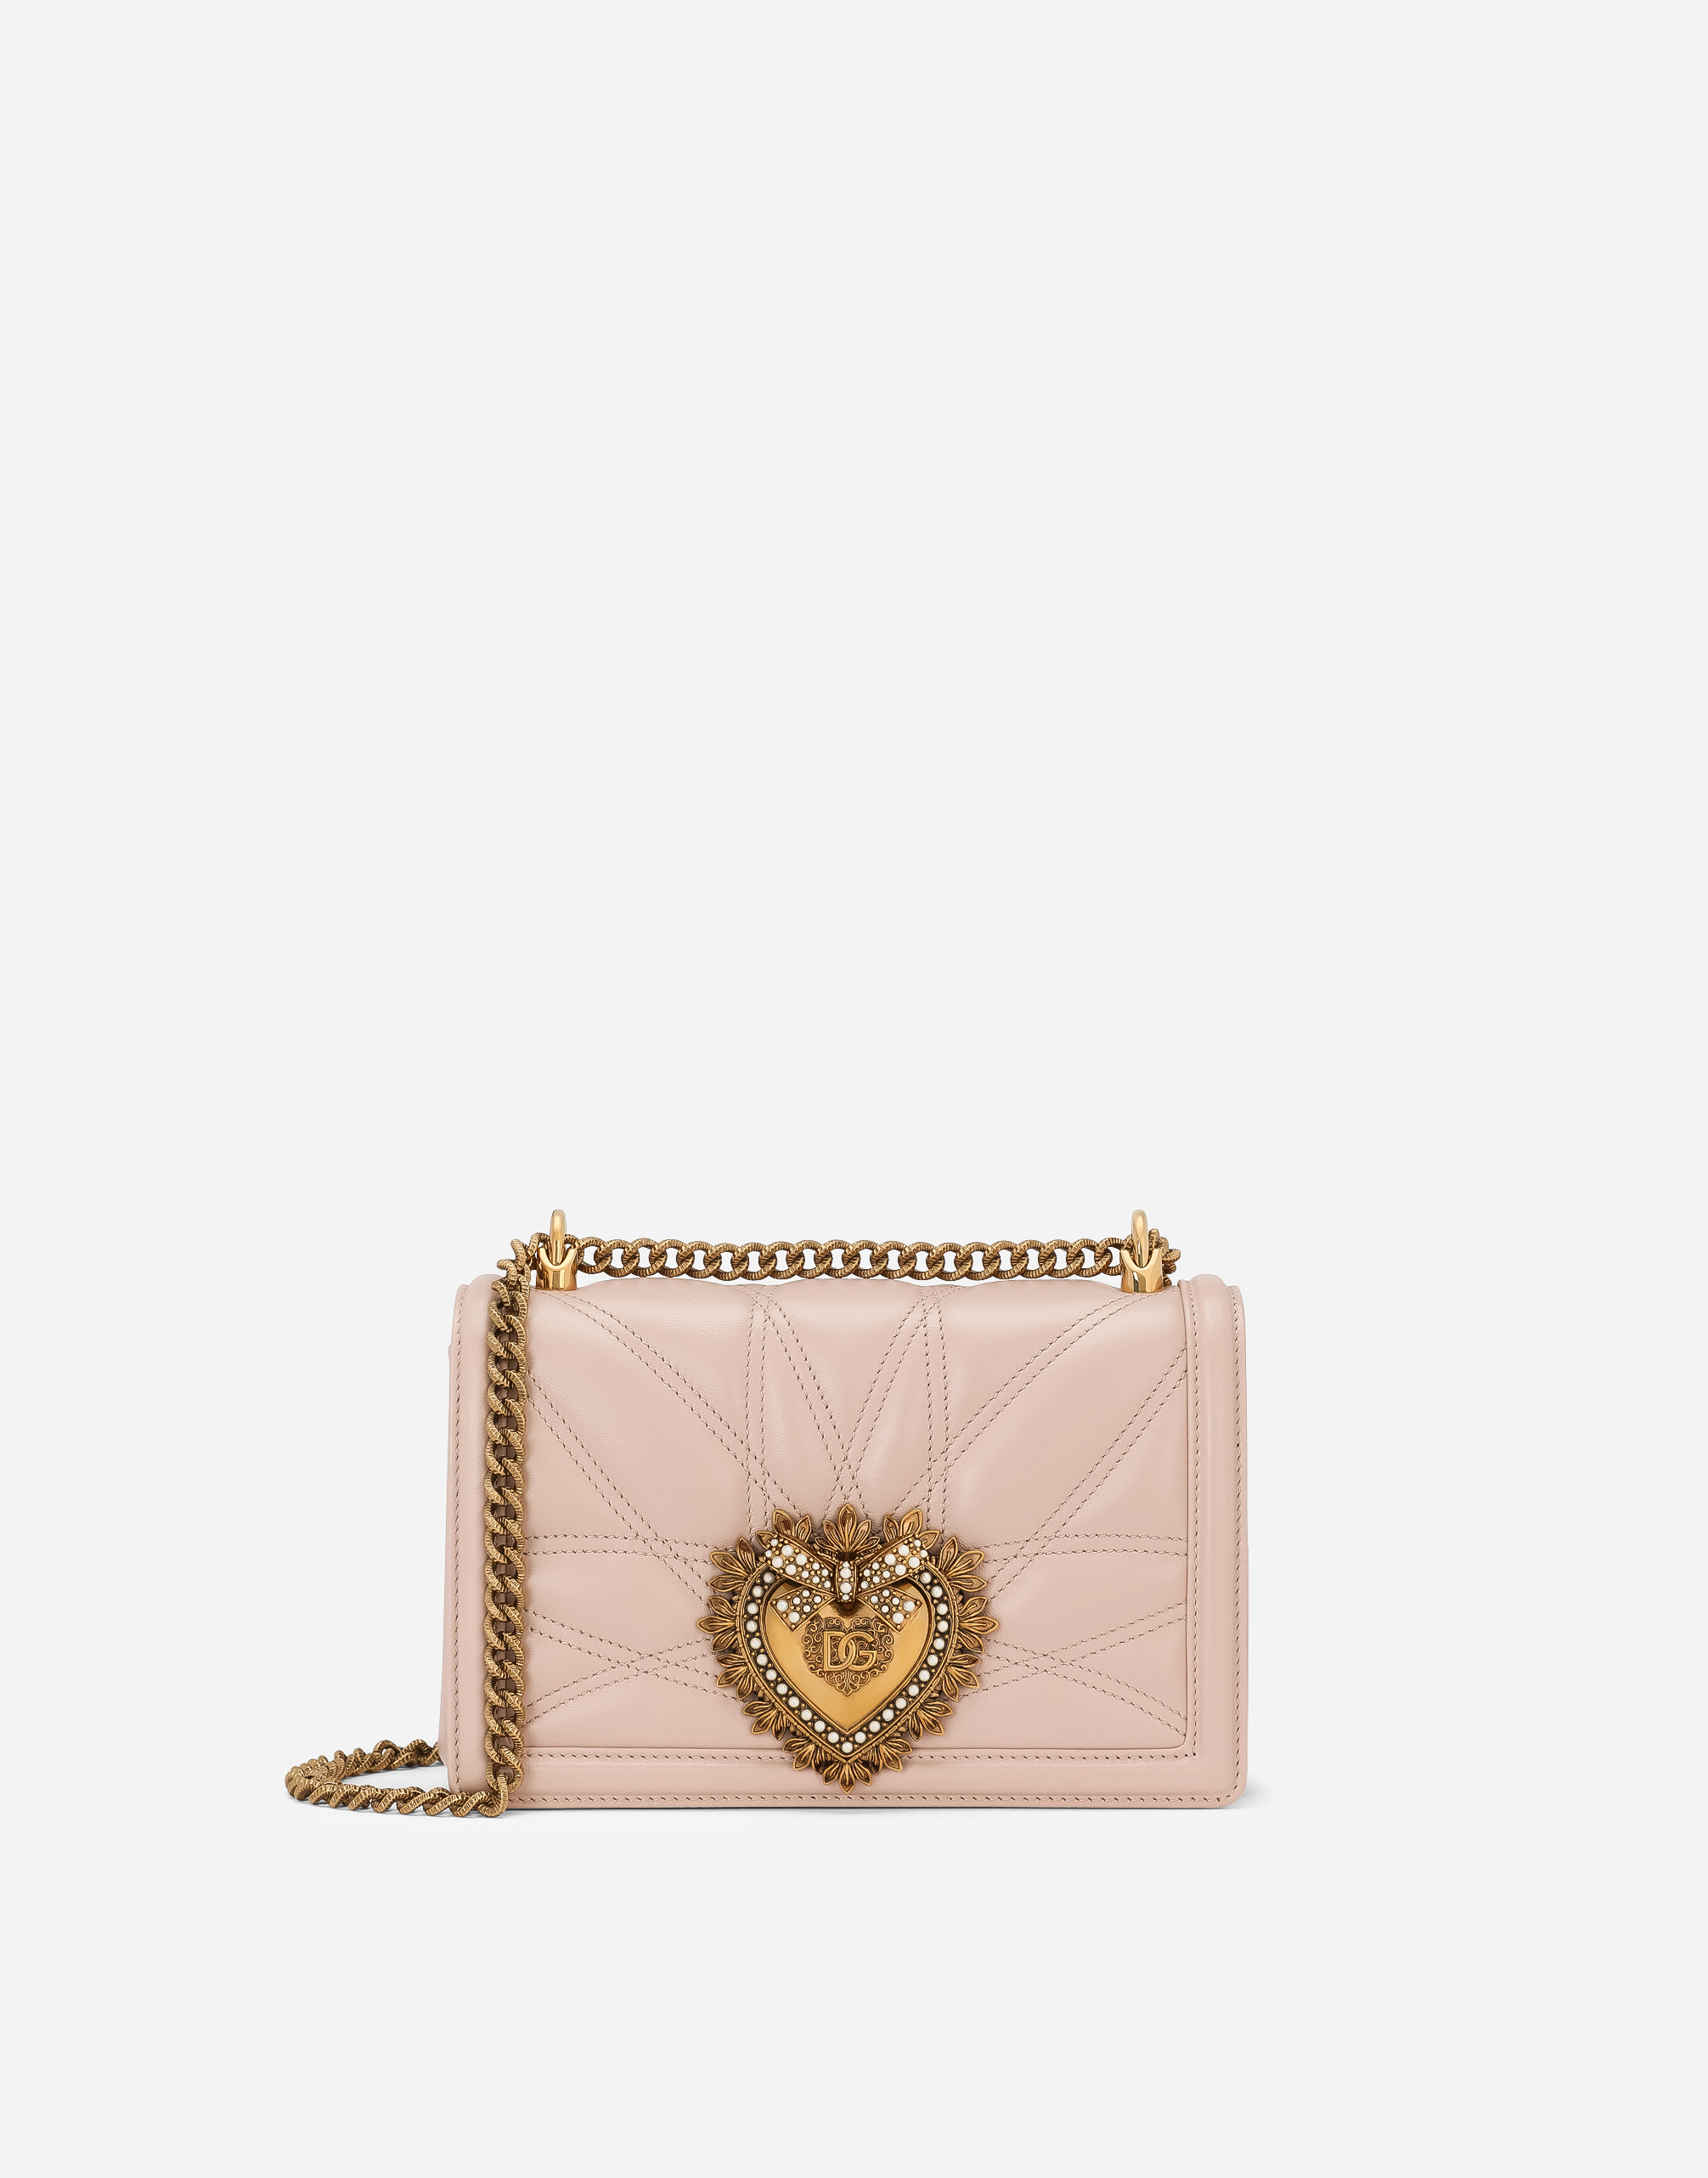 Medium Devotion bag in quilted nappa leather in Pale Pink